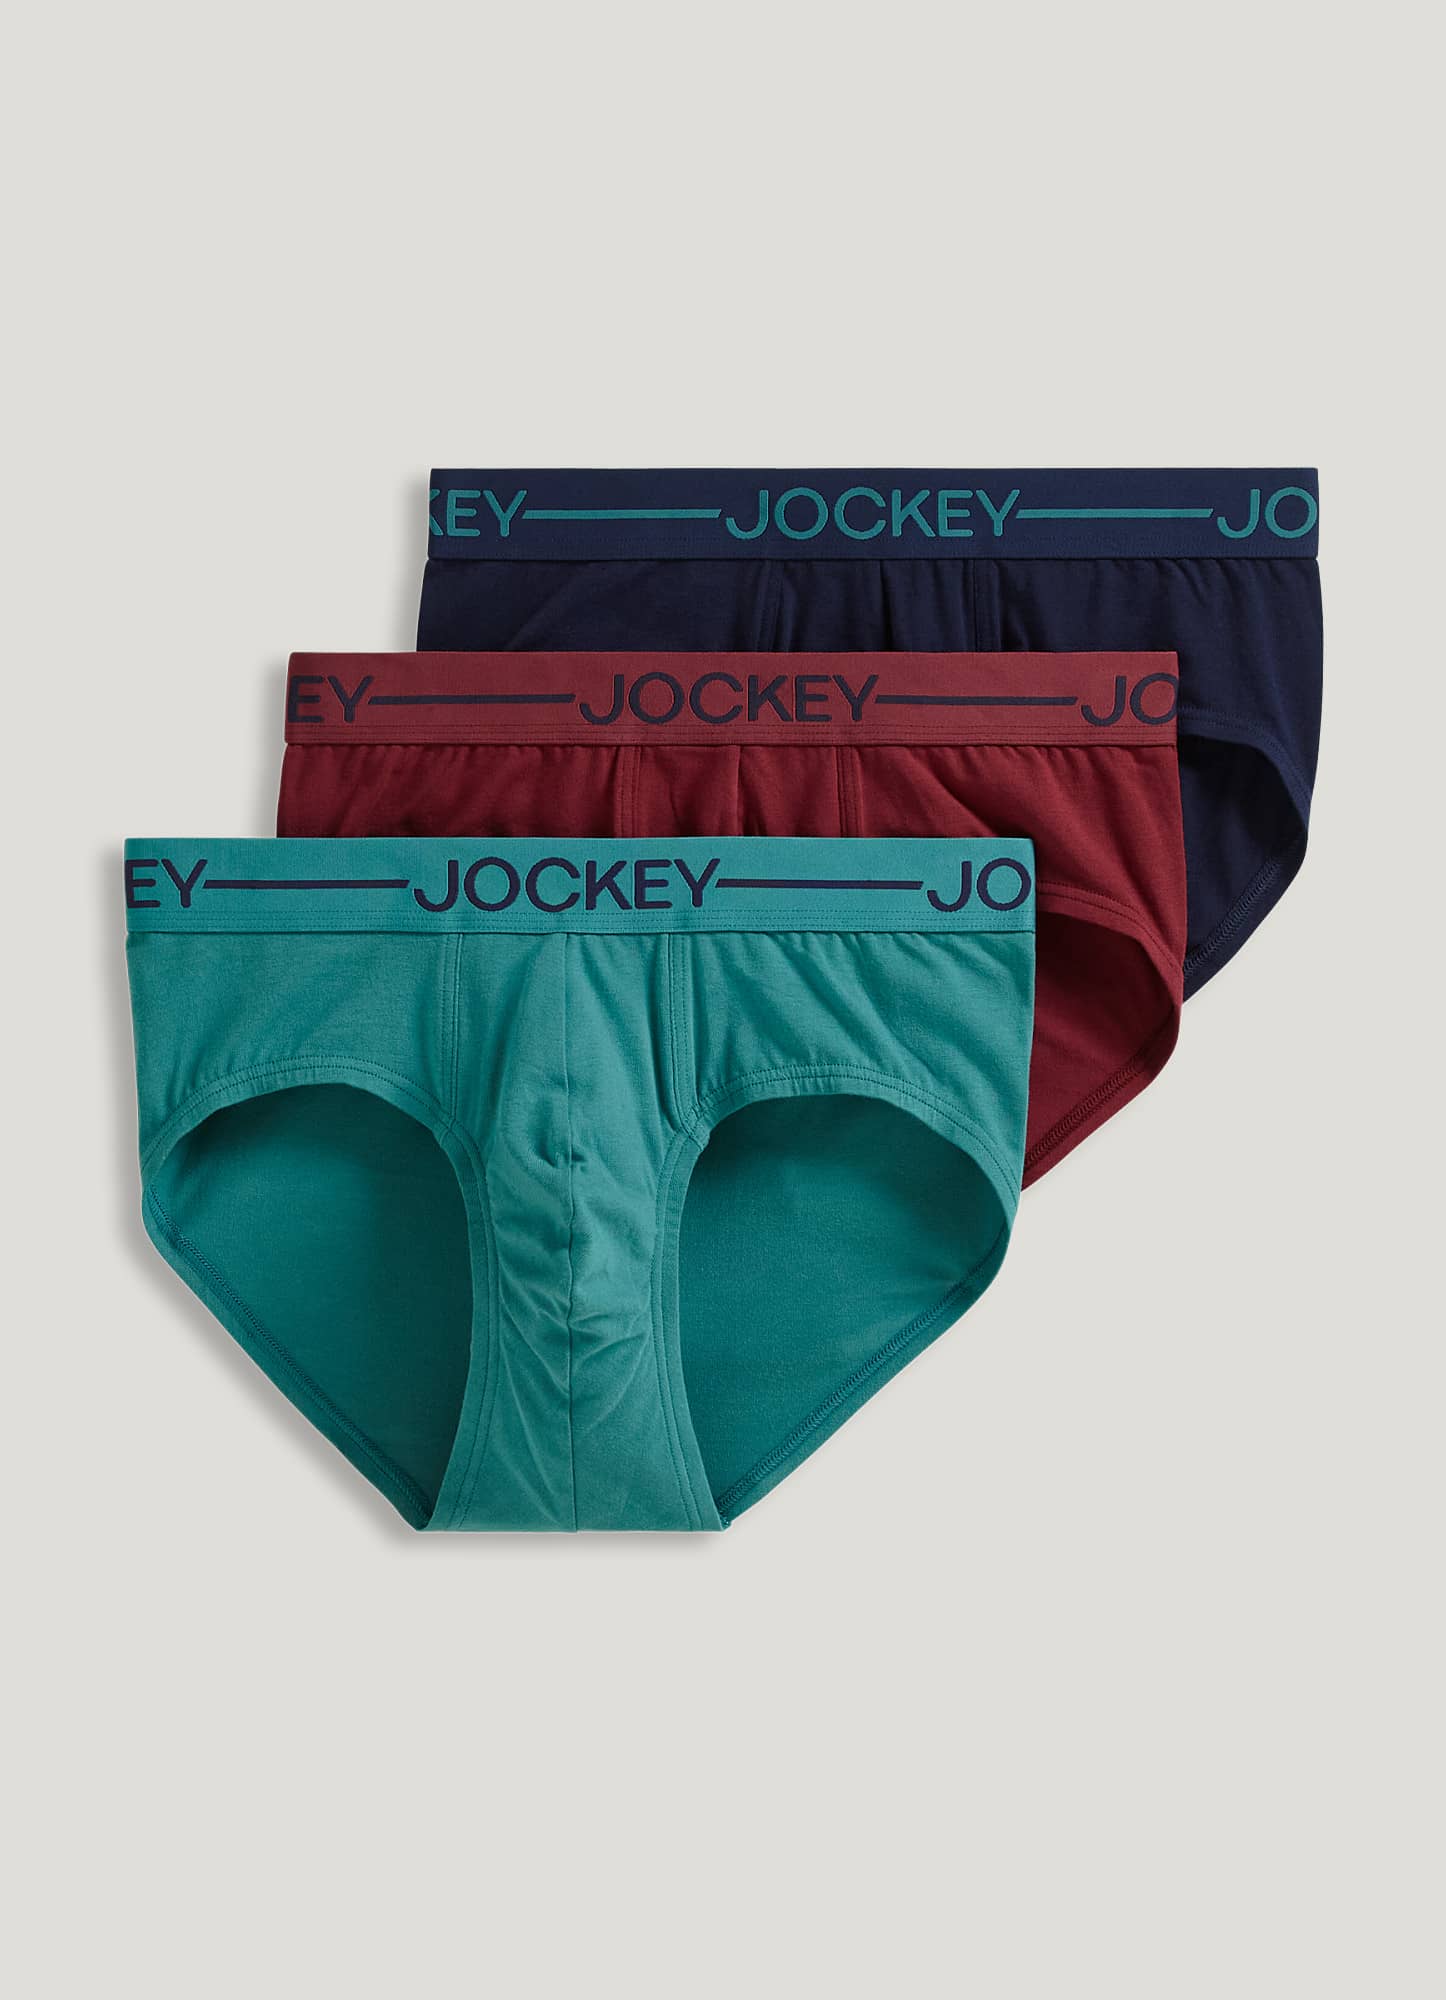 Jockey Men's Underwear Organic Cotton Stretch 4 Trunk - 3 Pack, Bayou/True  Navy/Leather Red, S : Clothing, Shoes & Jewelry 